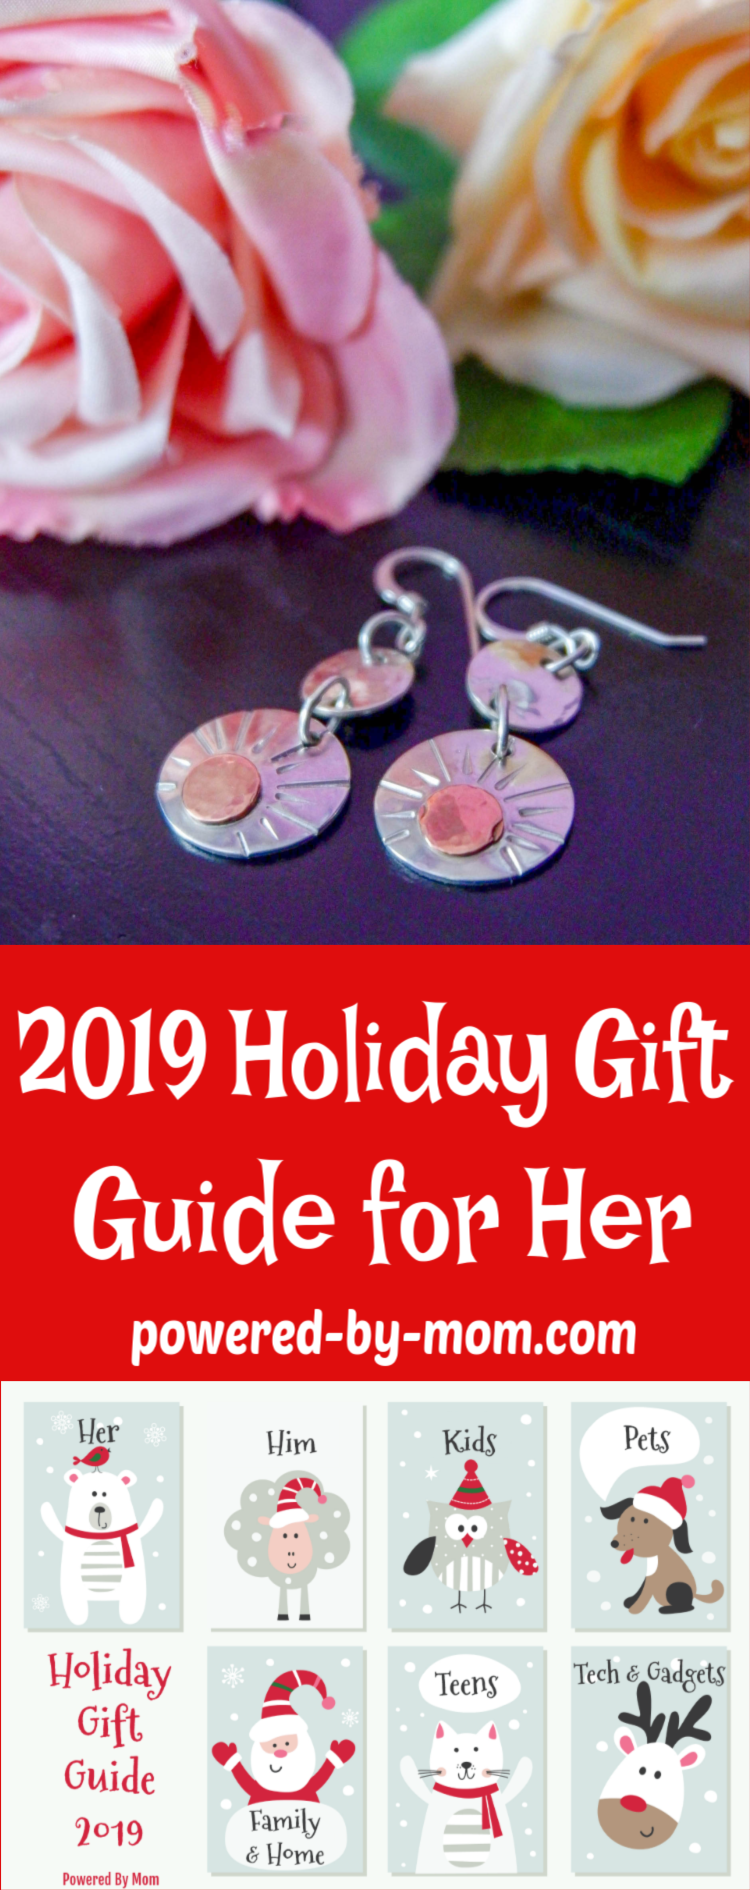 2019 Holiday Gift Guide for Her